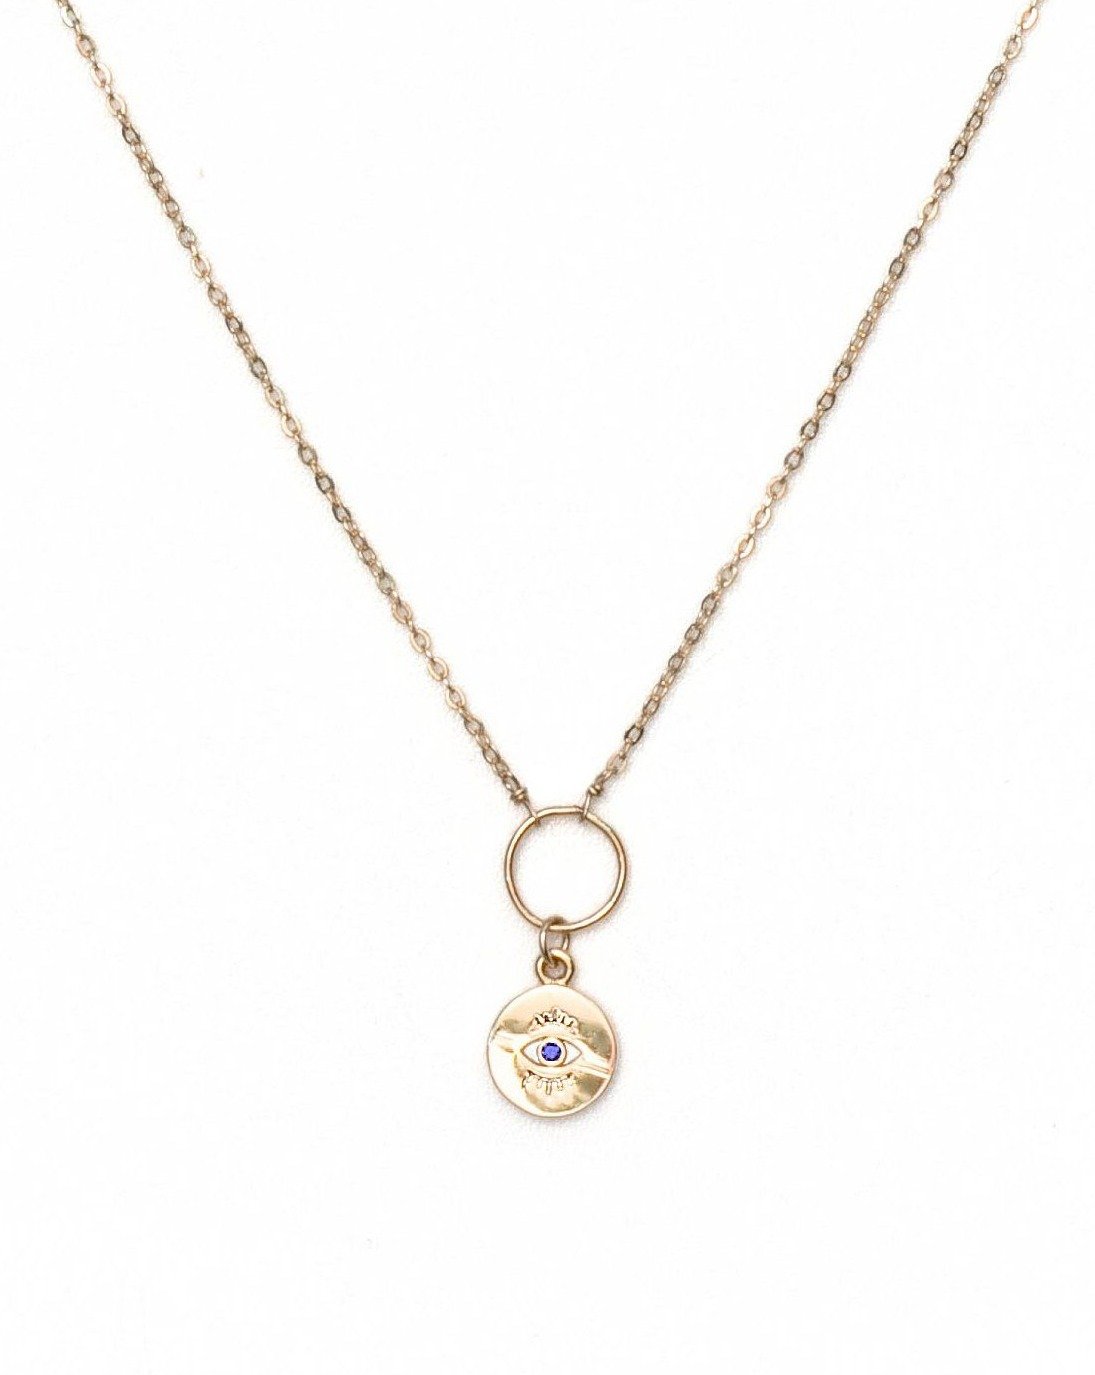 Eye On You Necklace by KOZAKH. A 16 to 18 inch adjustable length necklace in 14K Gold Filled, featuring a gold plated Evil Eye charm. 